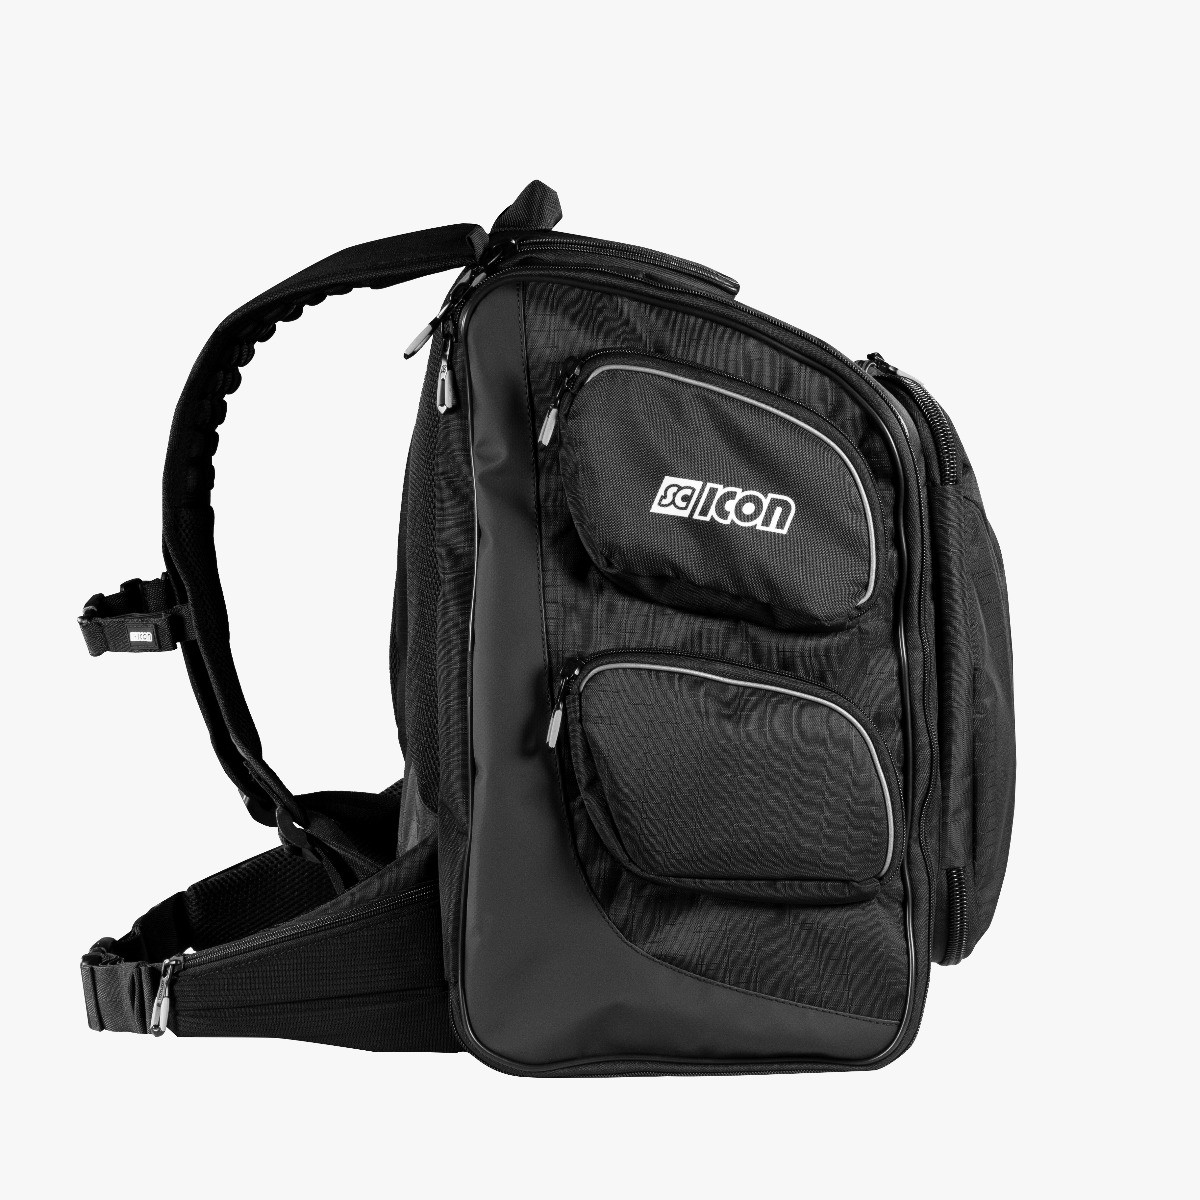 SPORTS PHYSIO BACKPACK